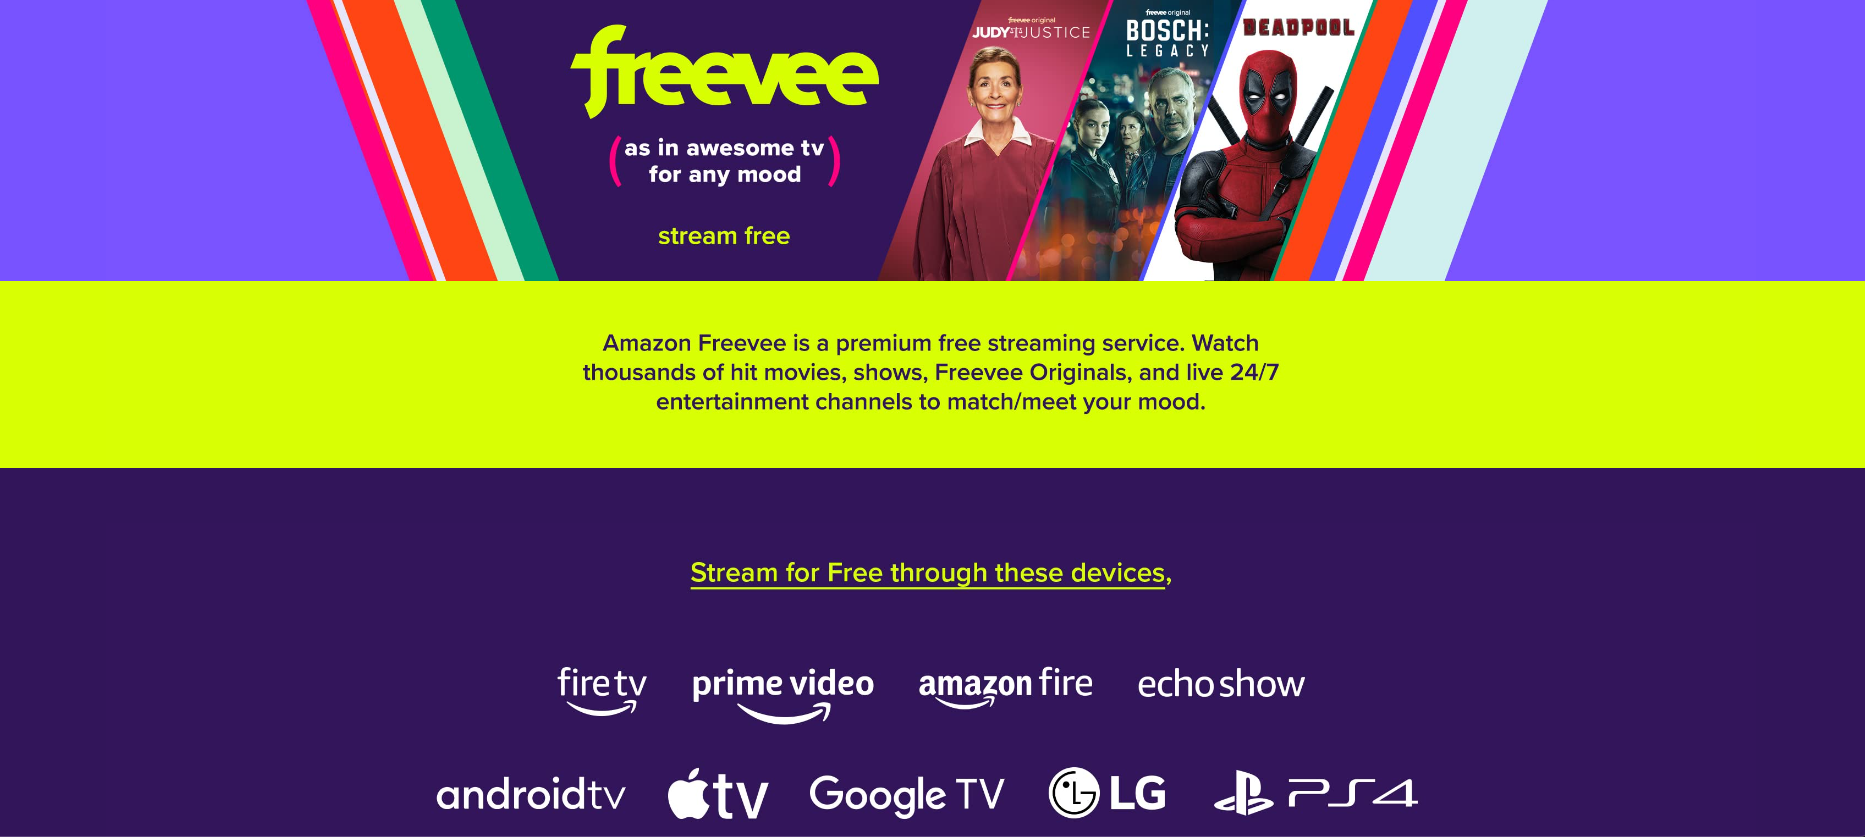 Remote.tools shares a list of websites to watch free movies. Freevee is free movie streaming website owned by Amazon.